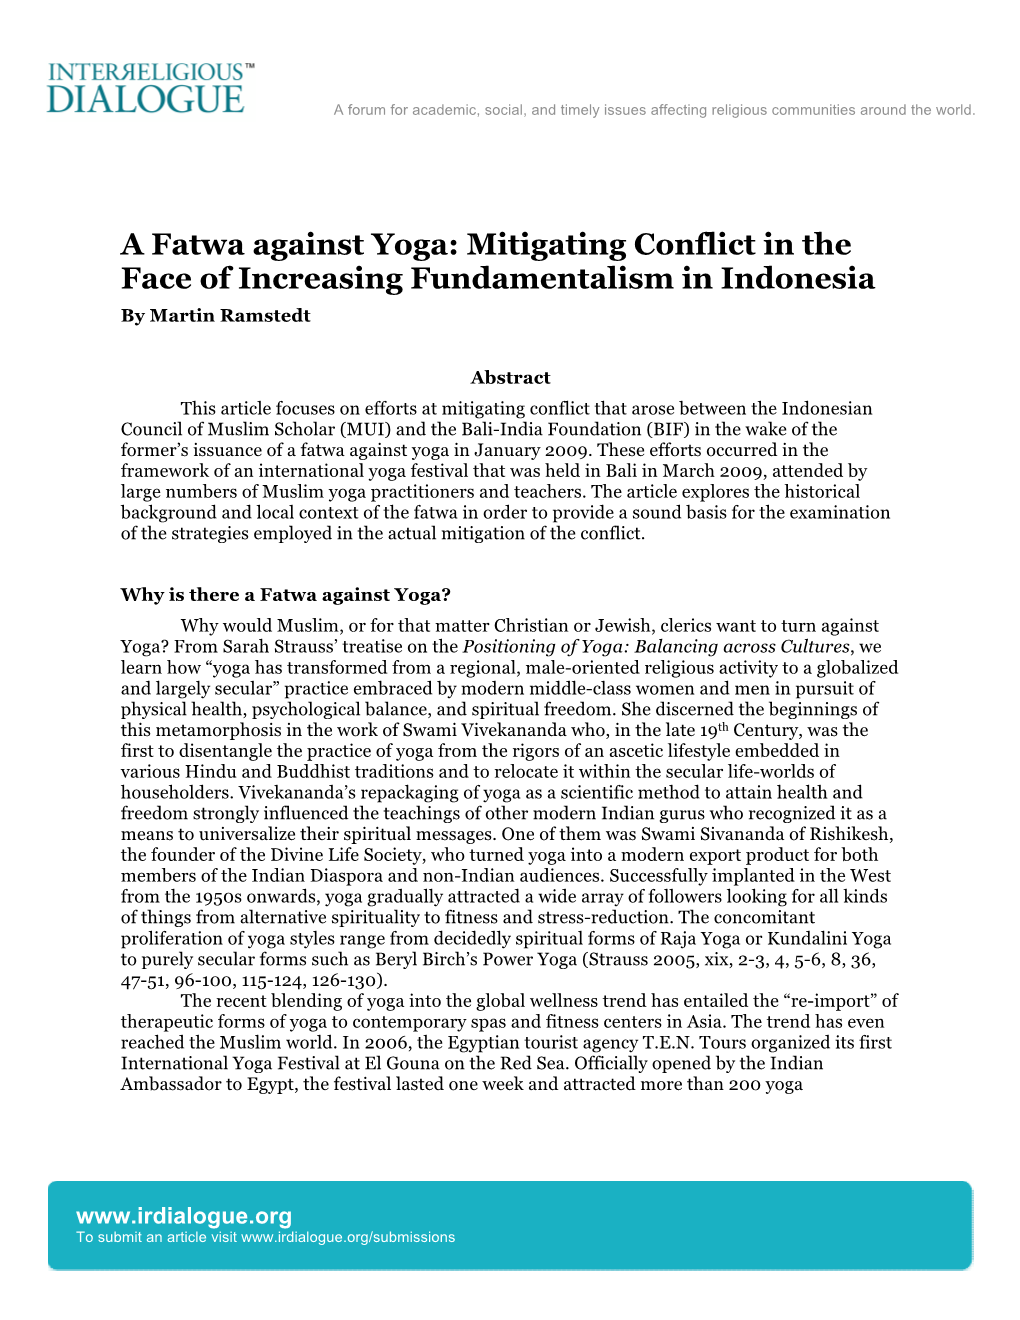 "A Fatwa Against Yoga- Mitigating Conflict in the Face of Increasing